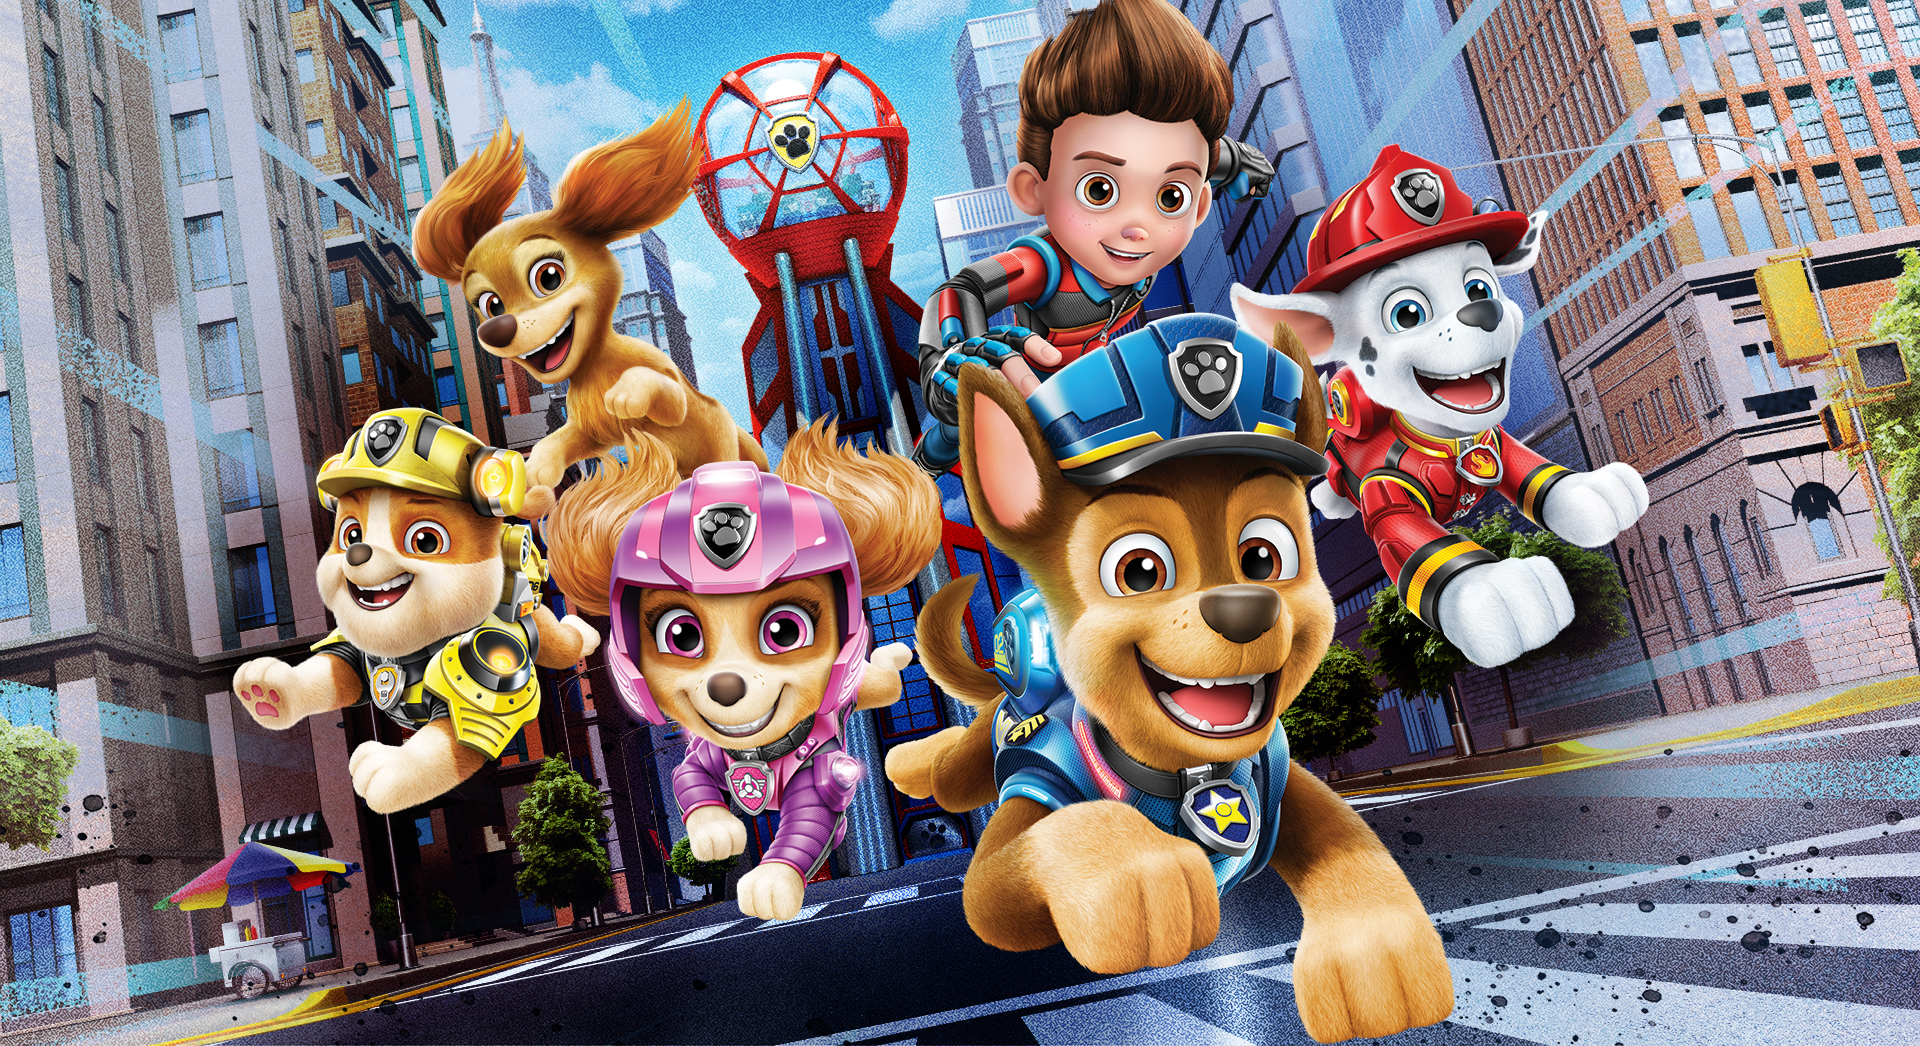 PAW Patrol The Movie: Put Your Paws Up!